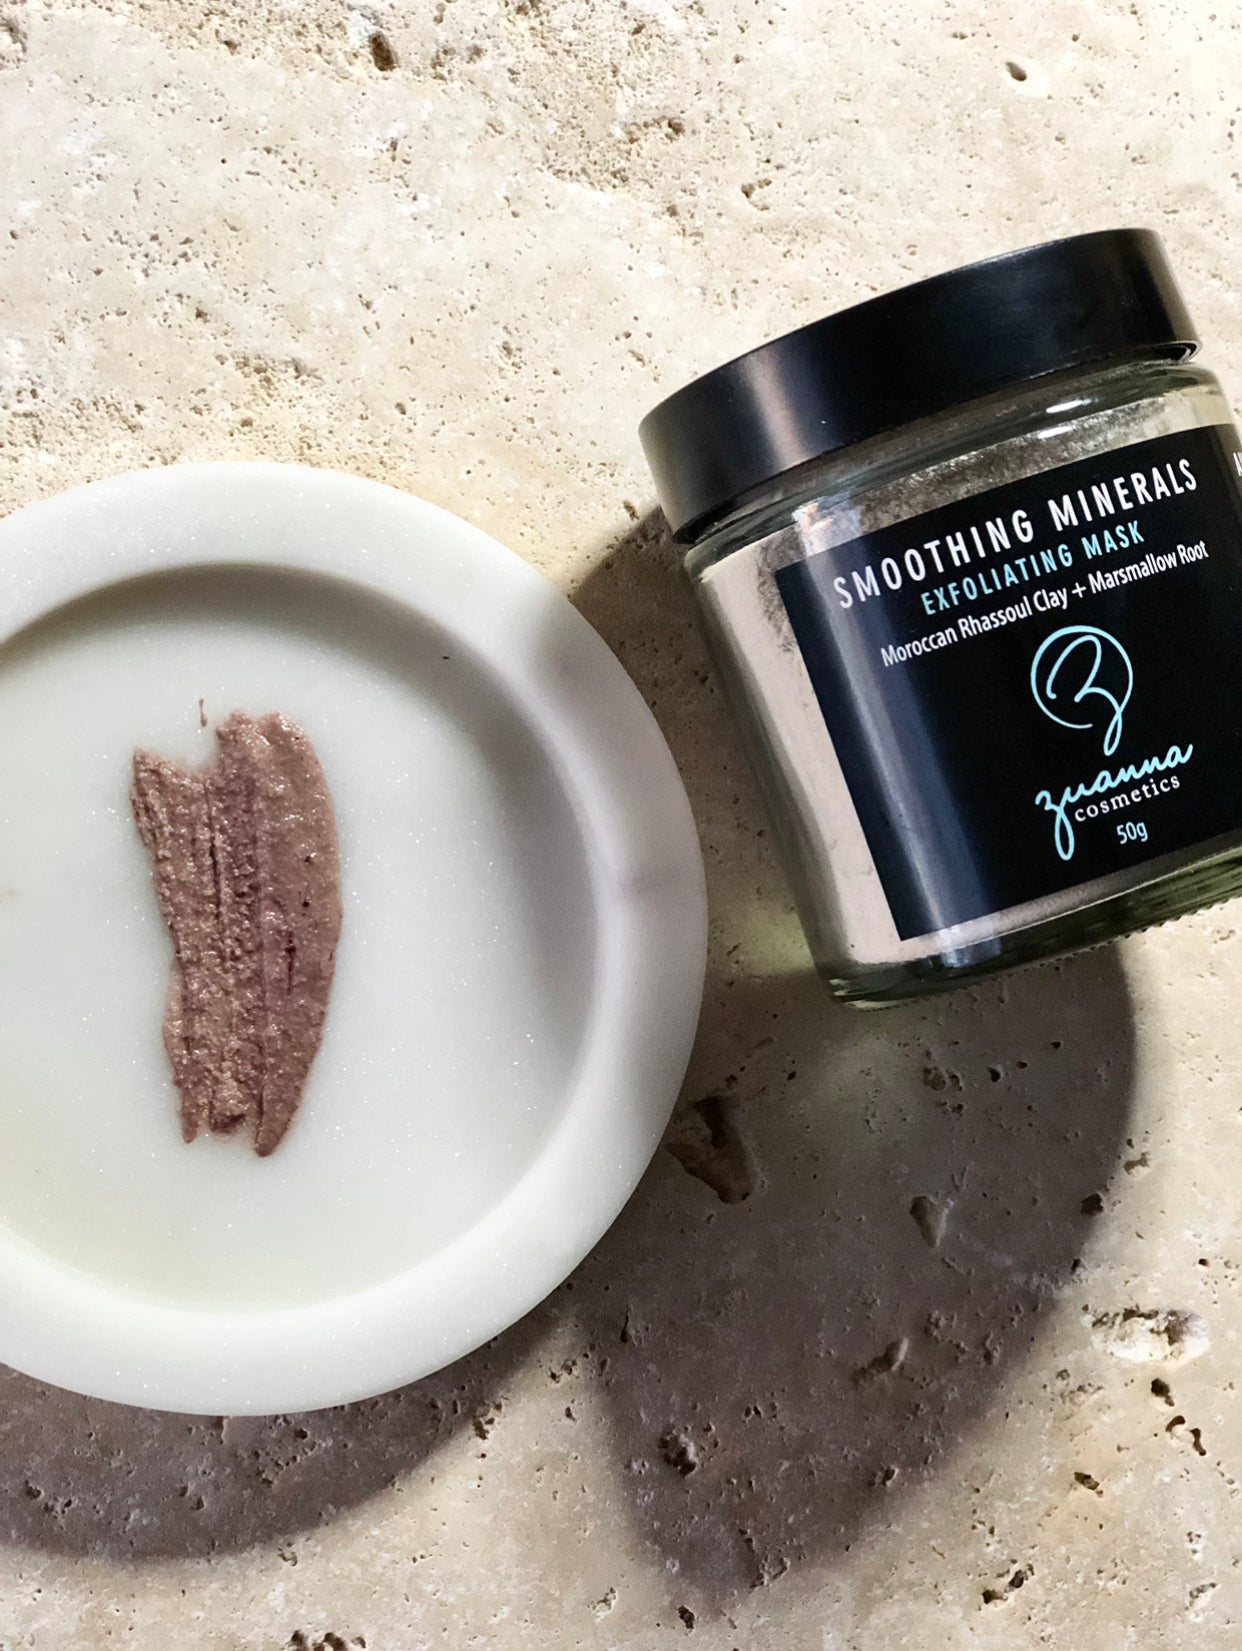 Smoothing Minerals Exfoliating Mask - Zuanna 